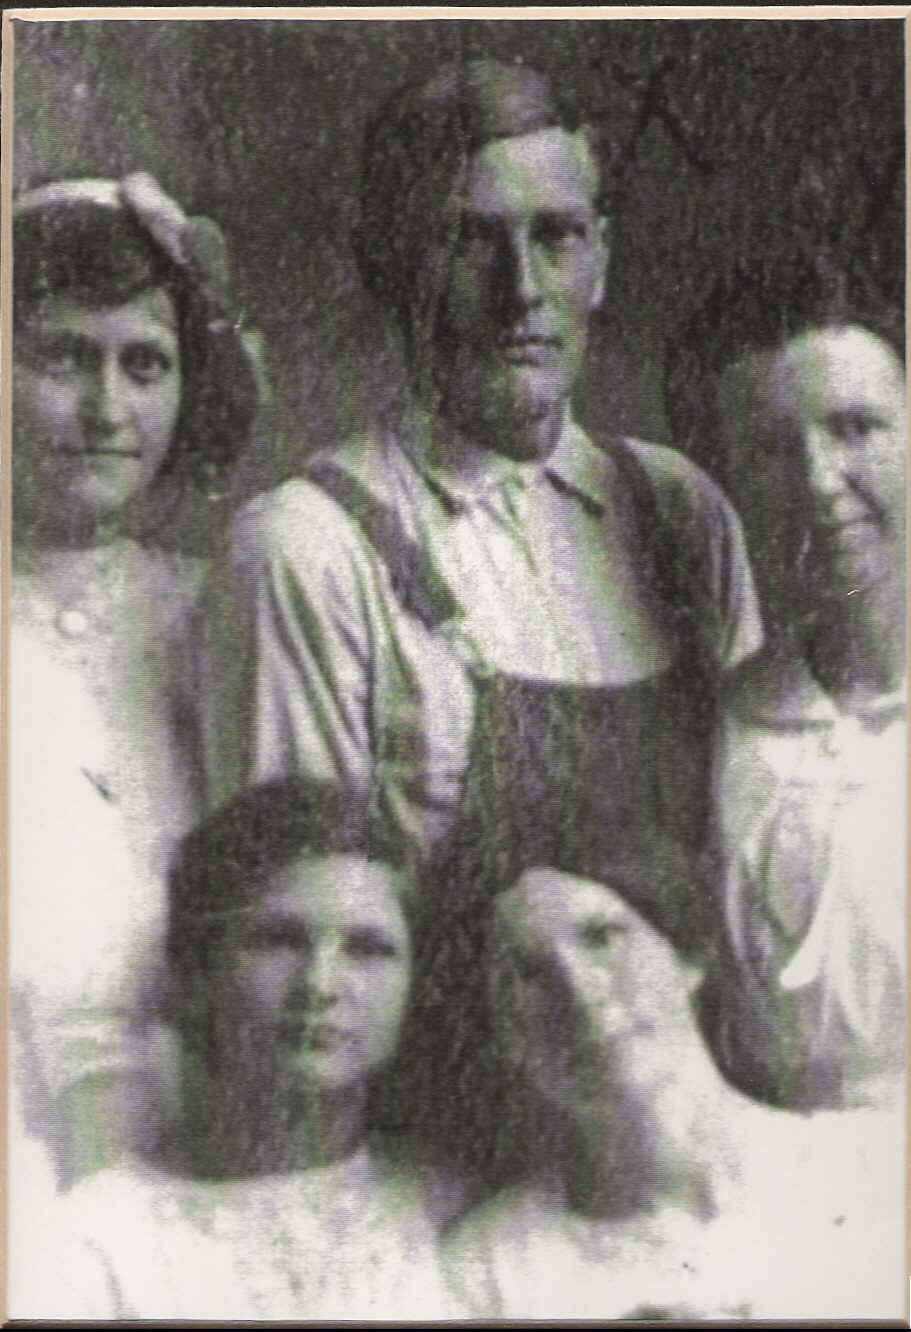 Richard, Lillie and the Witt sisters